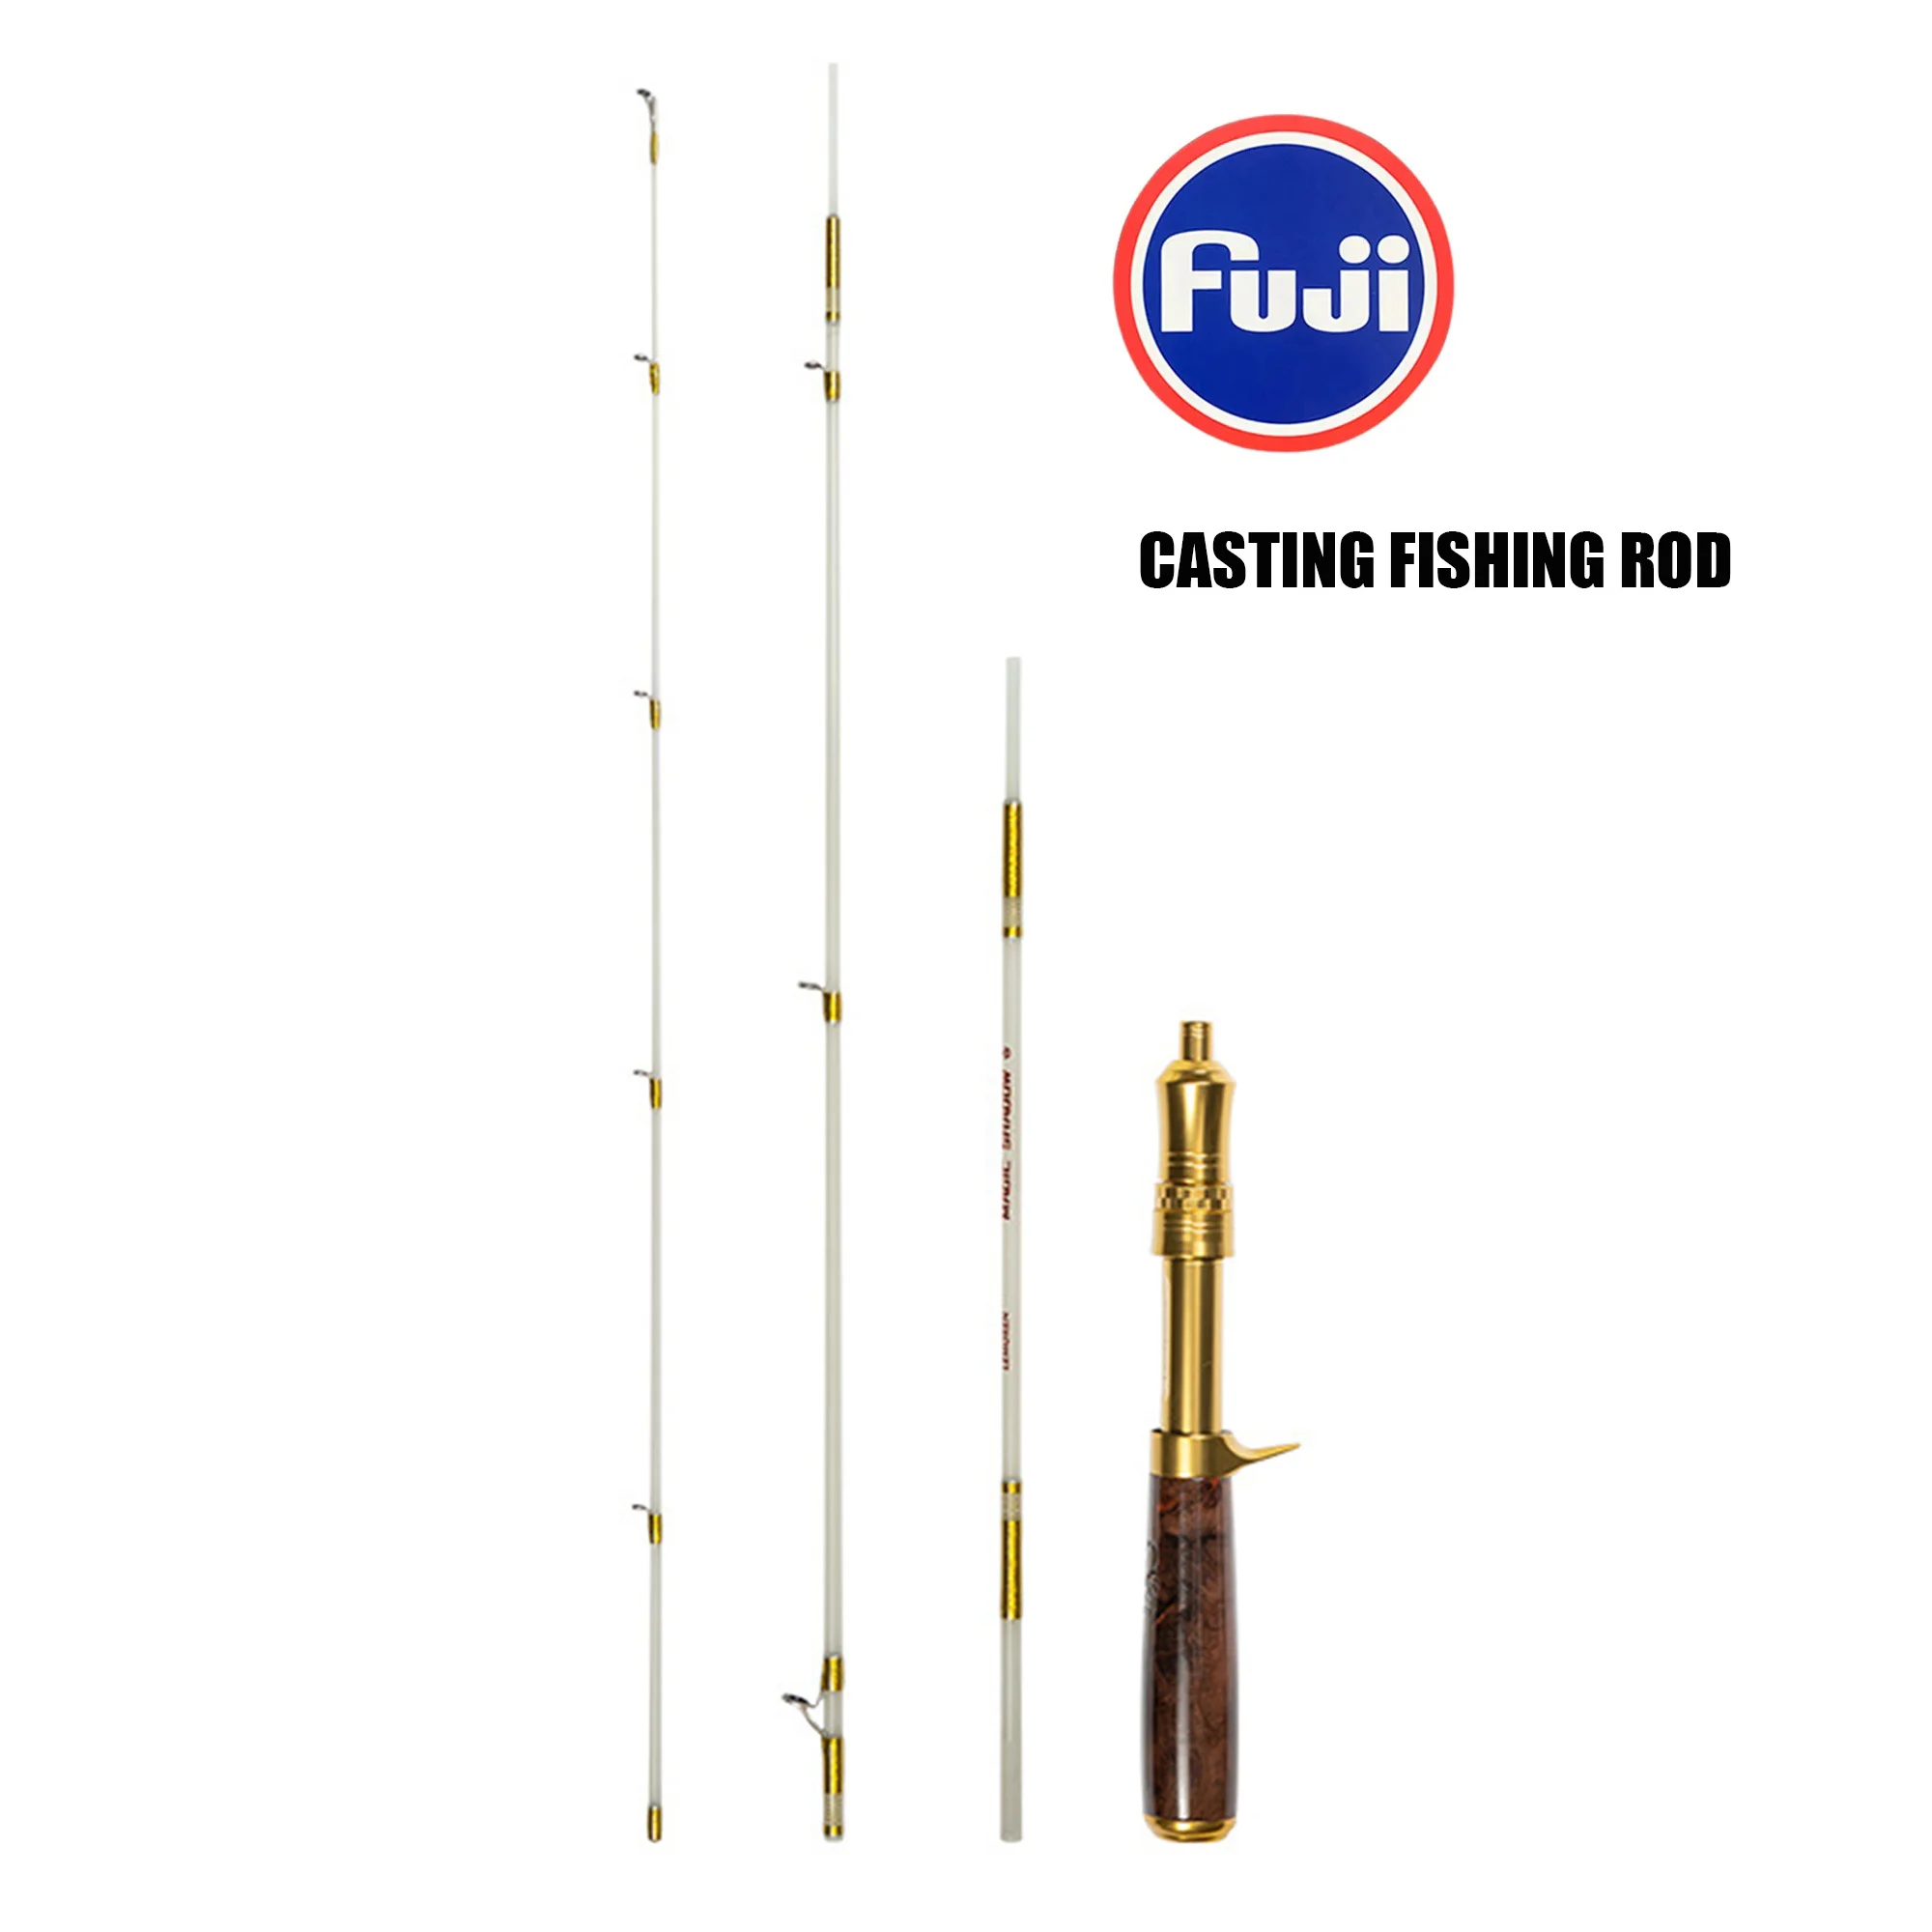 

1.5M FUJI Trout Fishing Rod Glass Fibre Squishy CASTING Fishing Rod Top Outdoor Gear with Solid Wood Handles